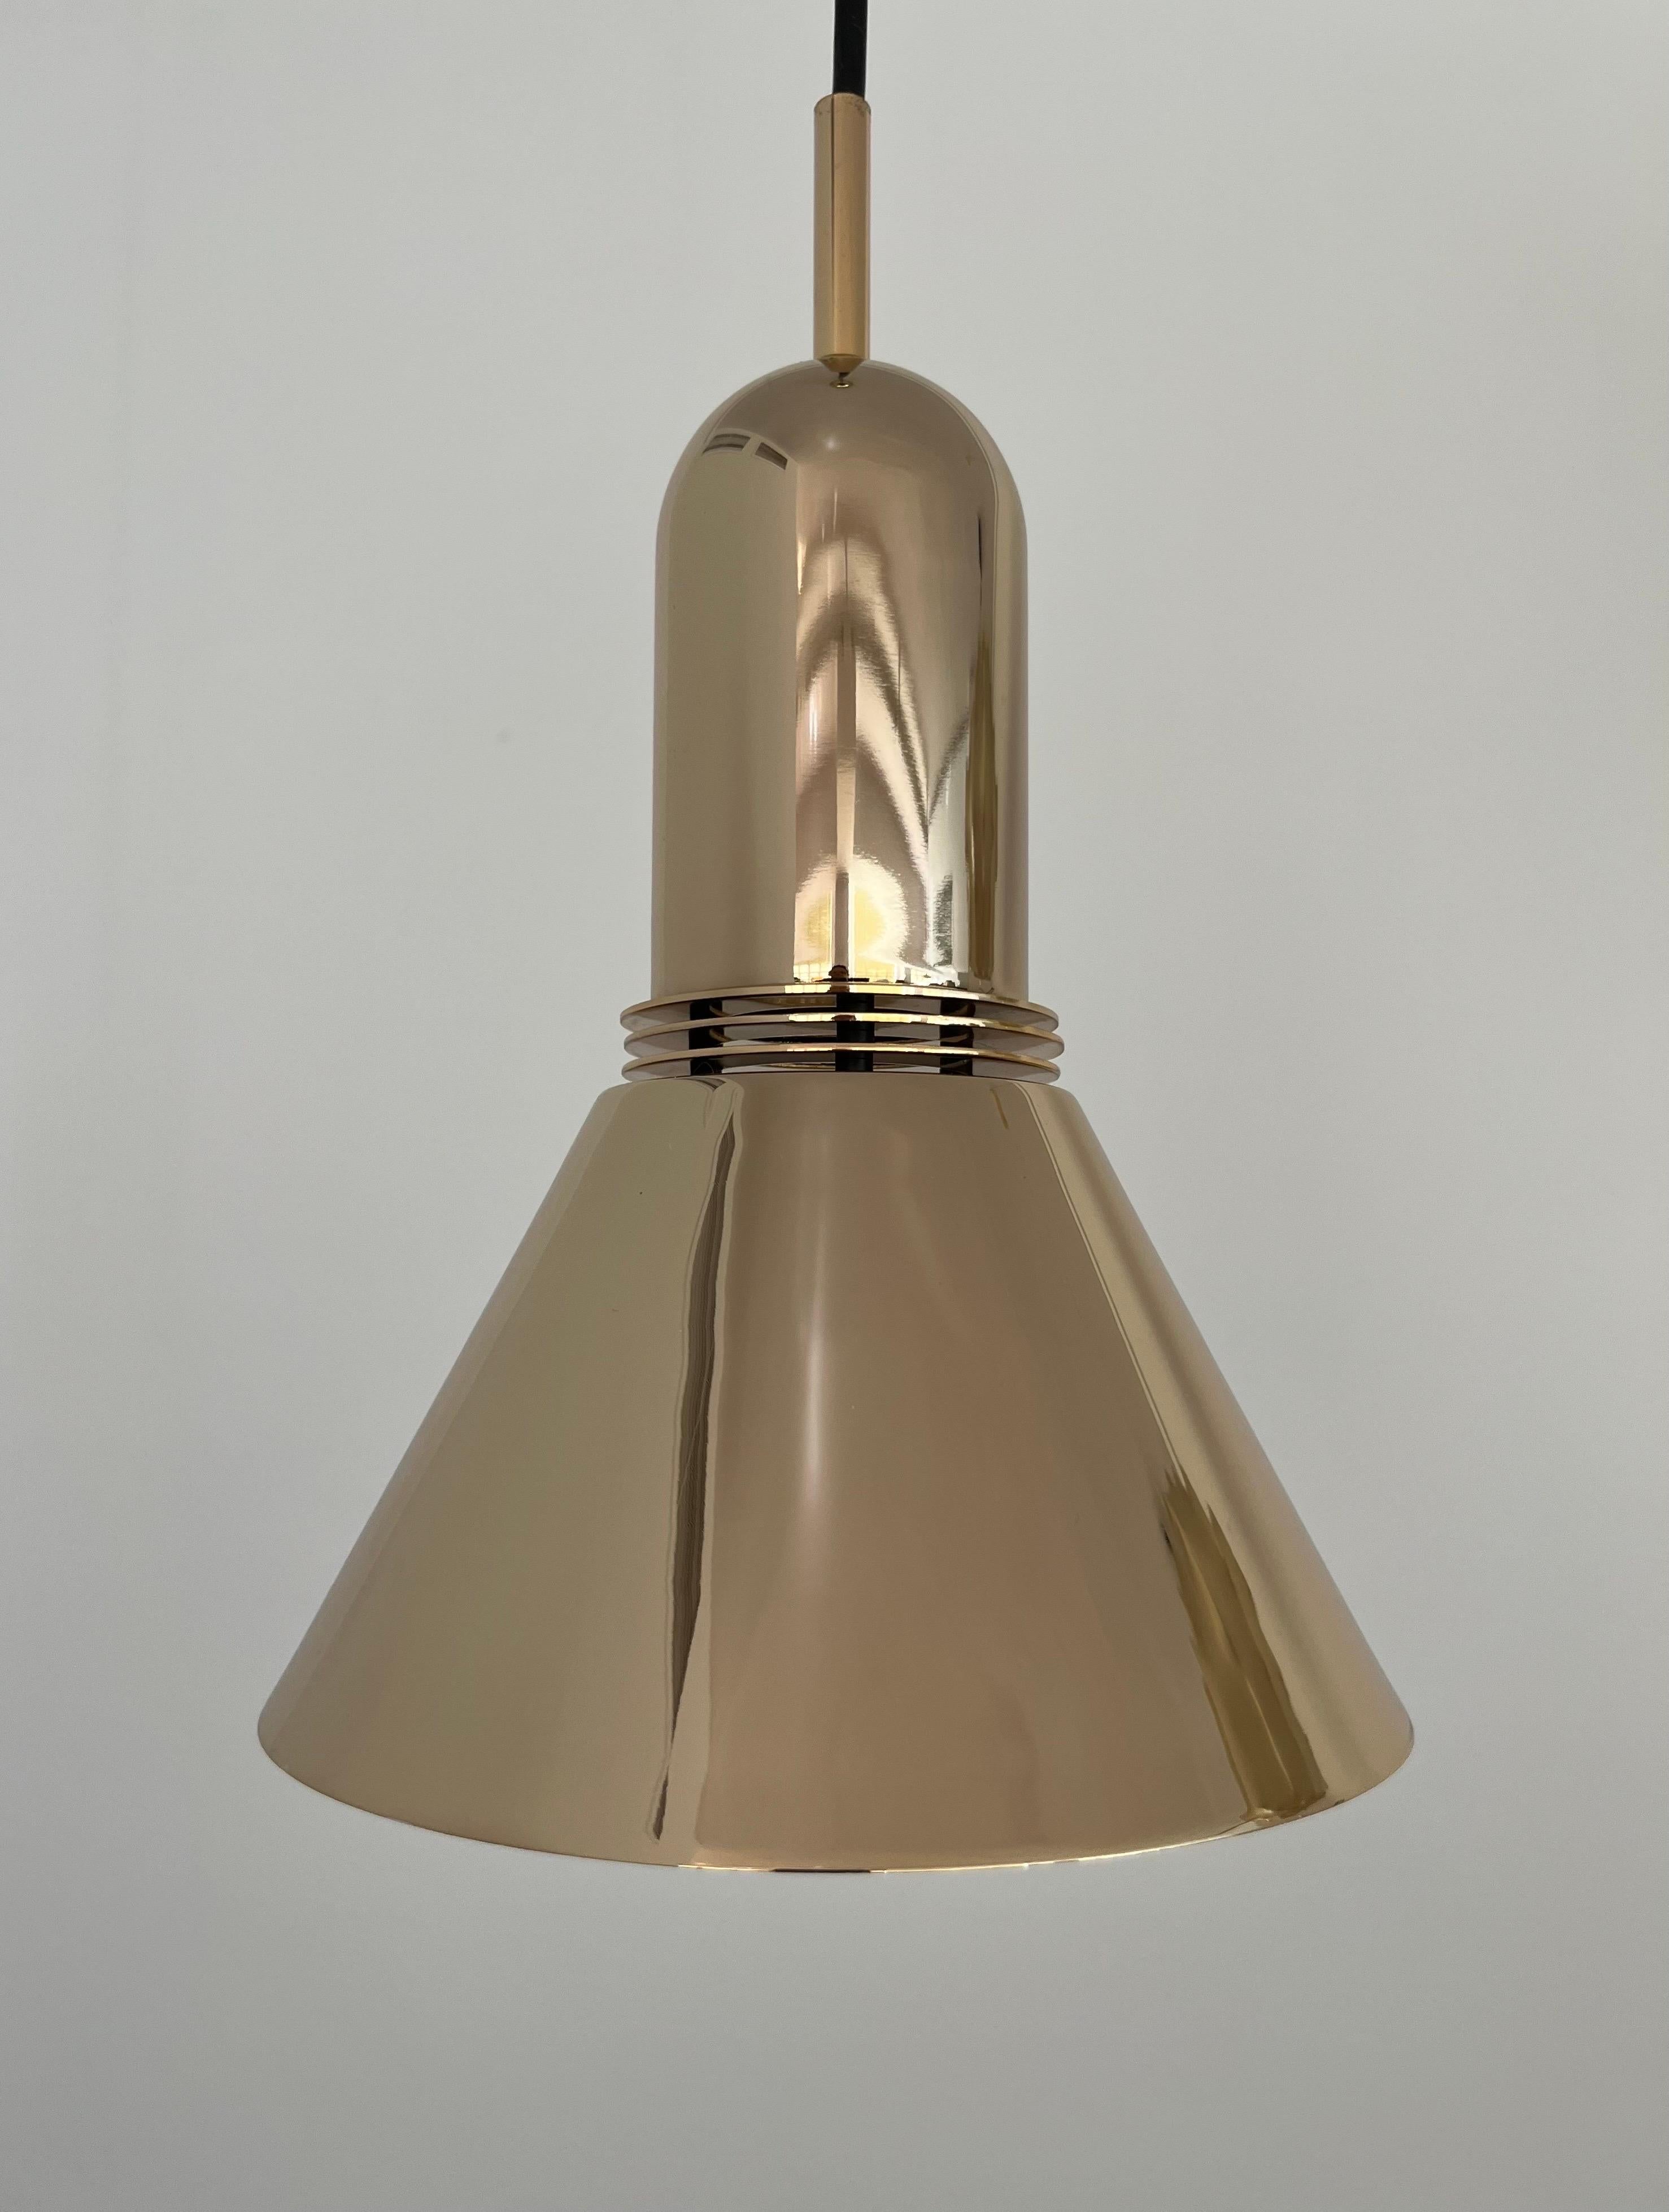 Beautiful and unique midcentury Set of Four of Gold Long Chandeliers by Leonardo Marelli for Estiluz. Model: T-1142 Dorado (golden). These fixtures were manufactured in Barcelona (Spain) during 1970s. Chrome plating in gold and Interior: white